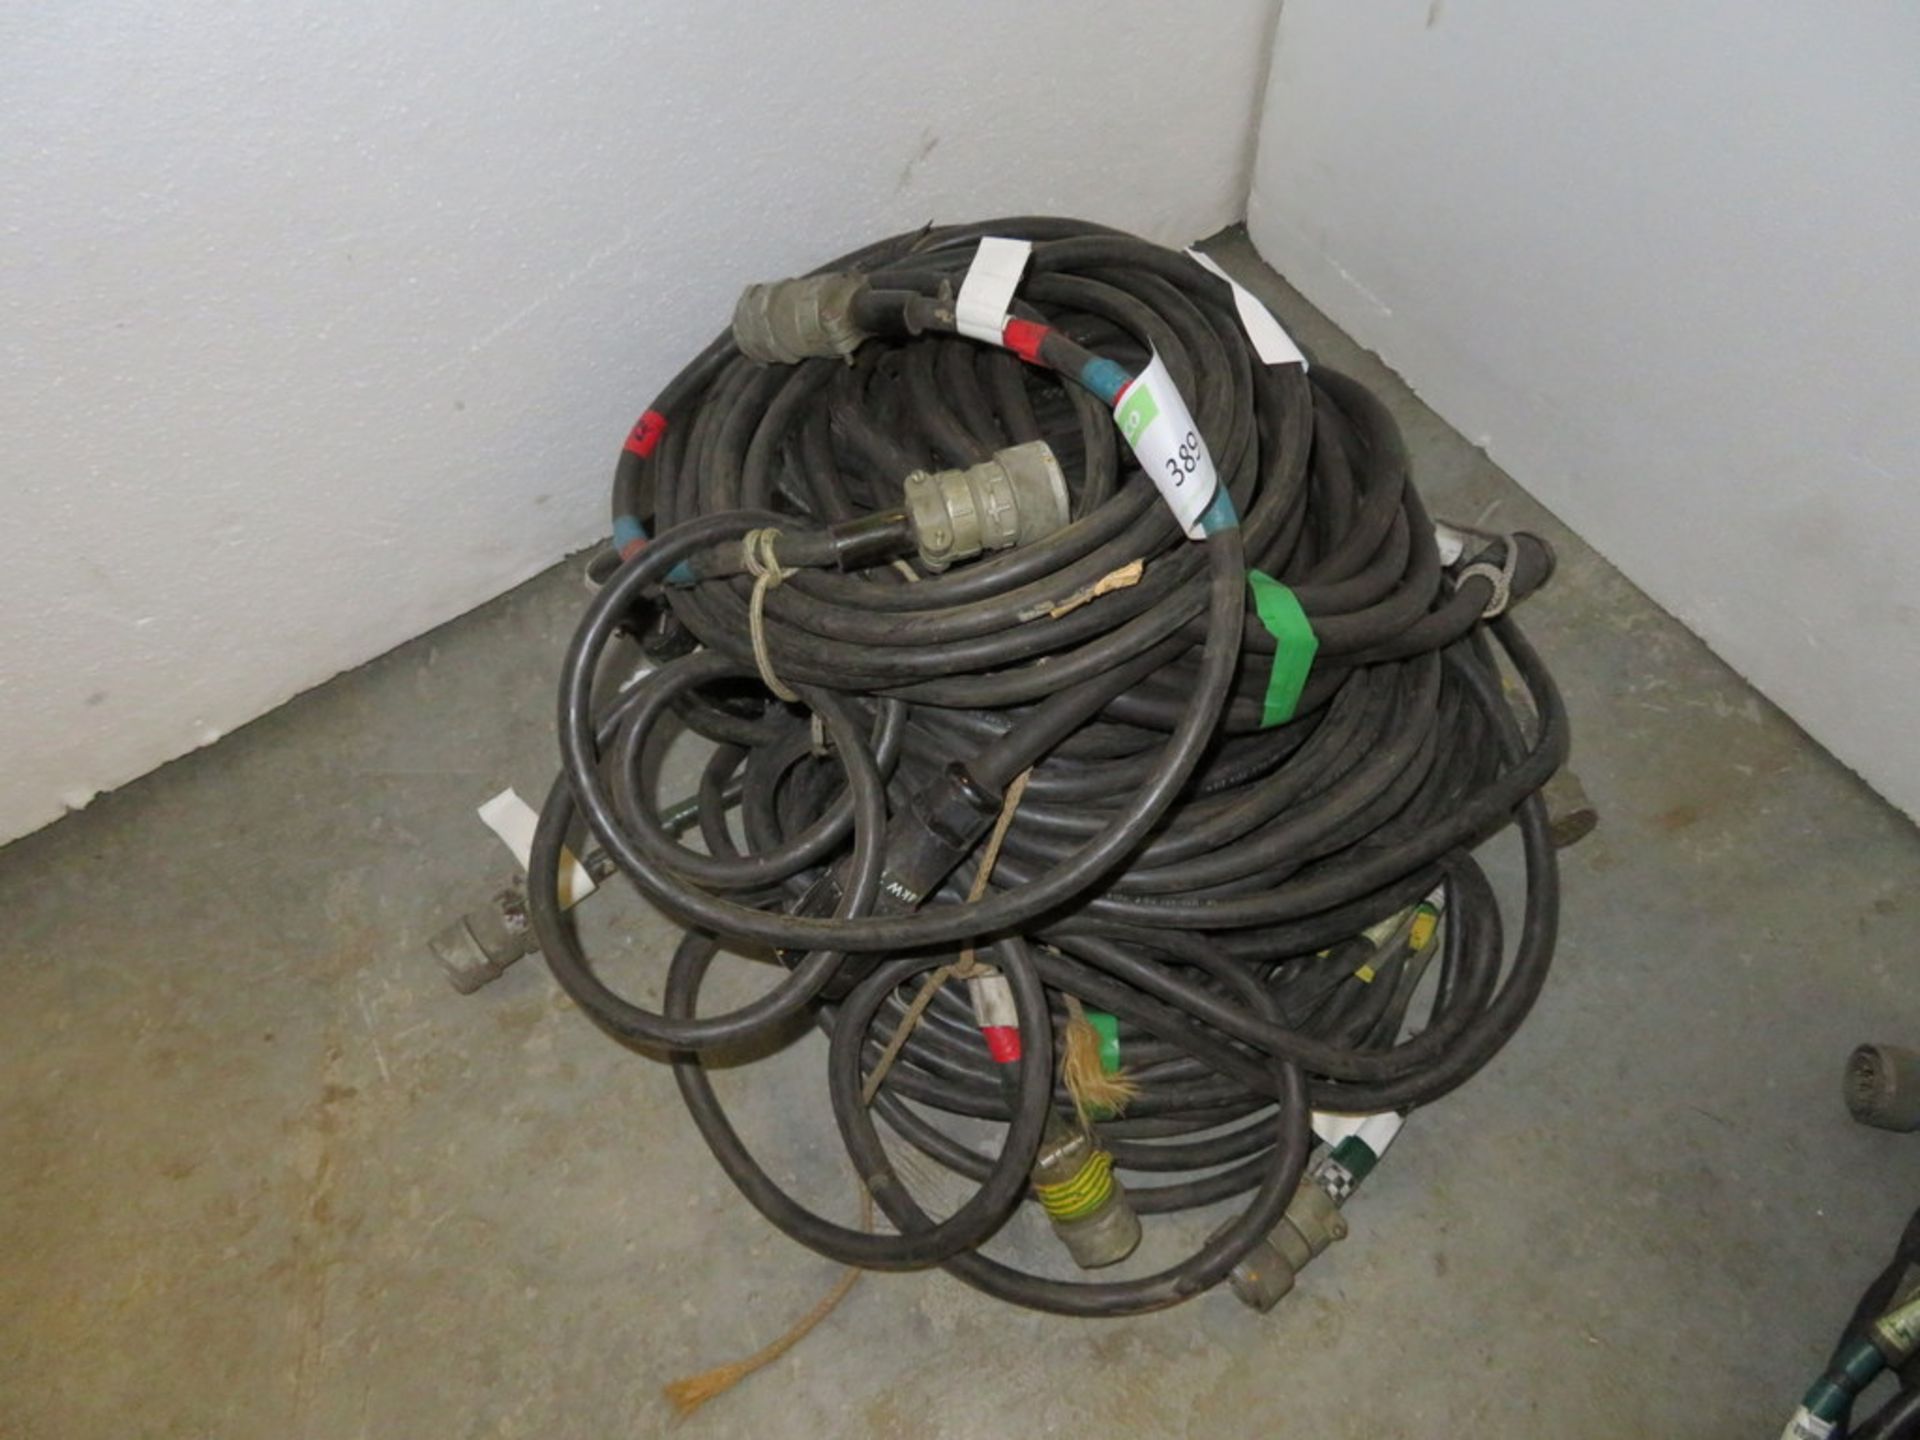 Assorted header cables - approximately 6